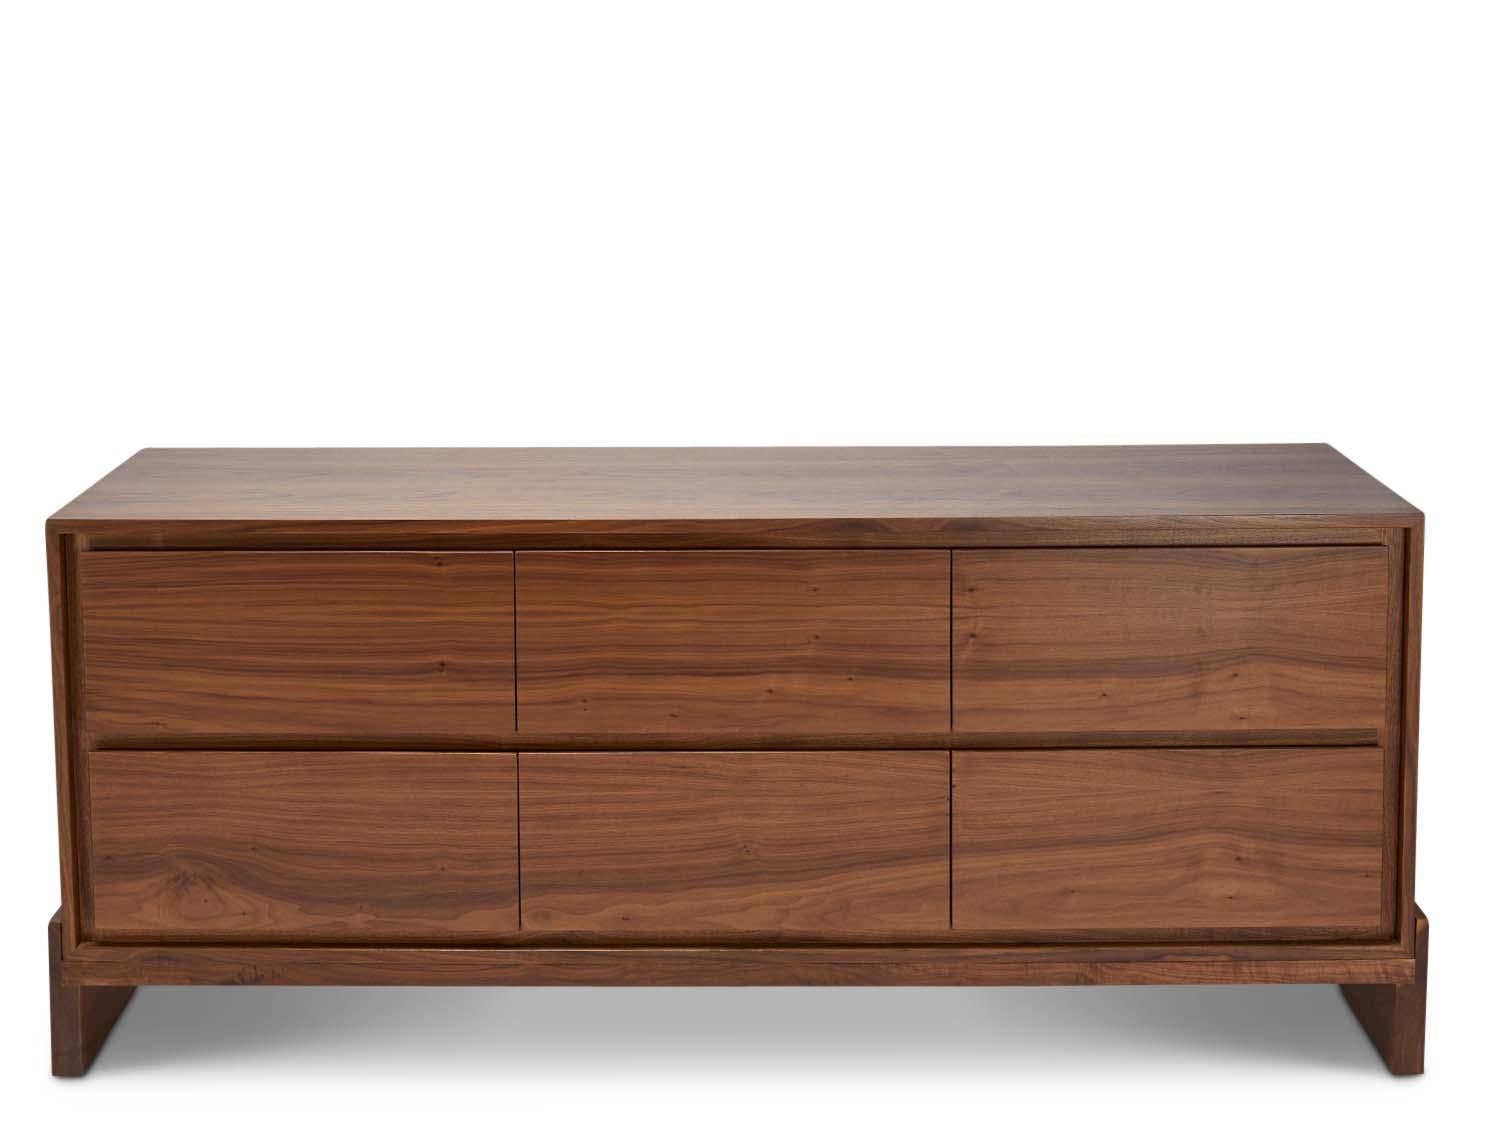 The Platform chest is a six drawer chest with a solid American walnut or white oak front and base. 

The Lawson-Fenning Collection is designed and handmade in Los Angeles, California. Reach out to discover what options are currently in stock.